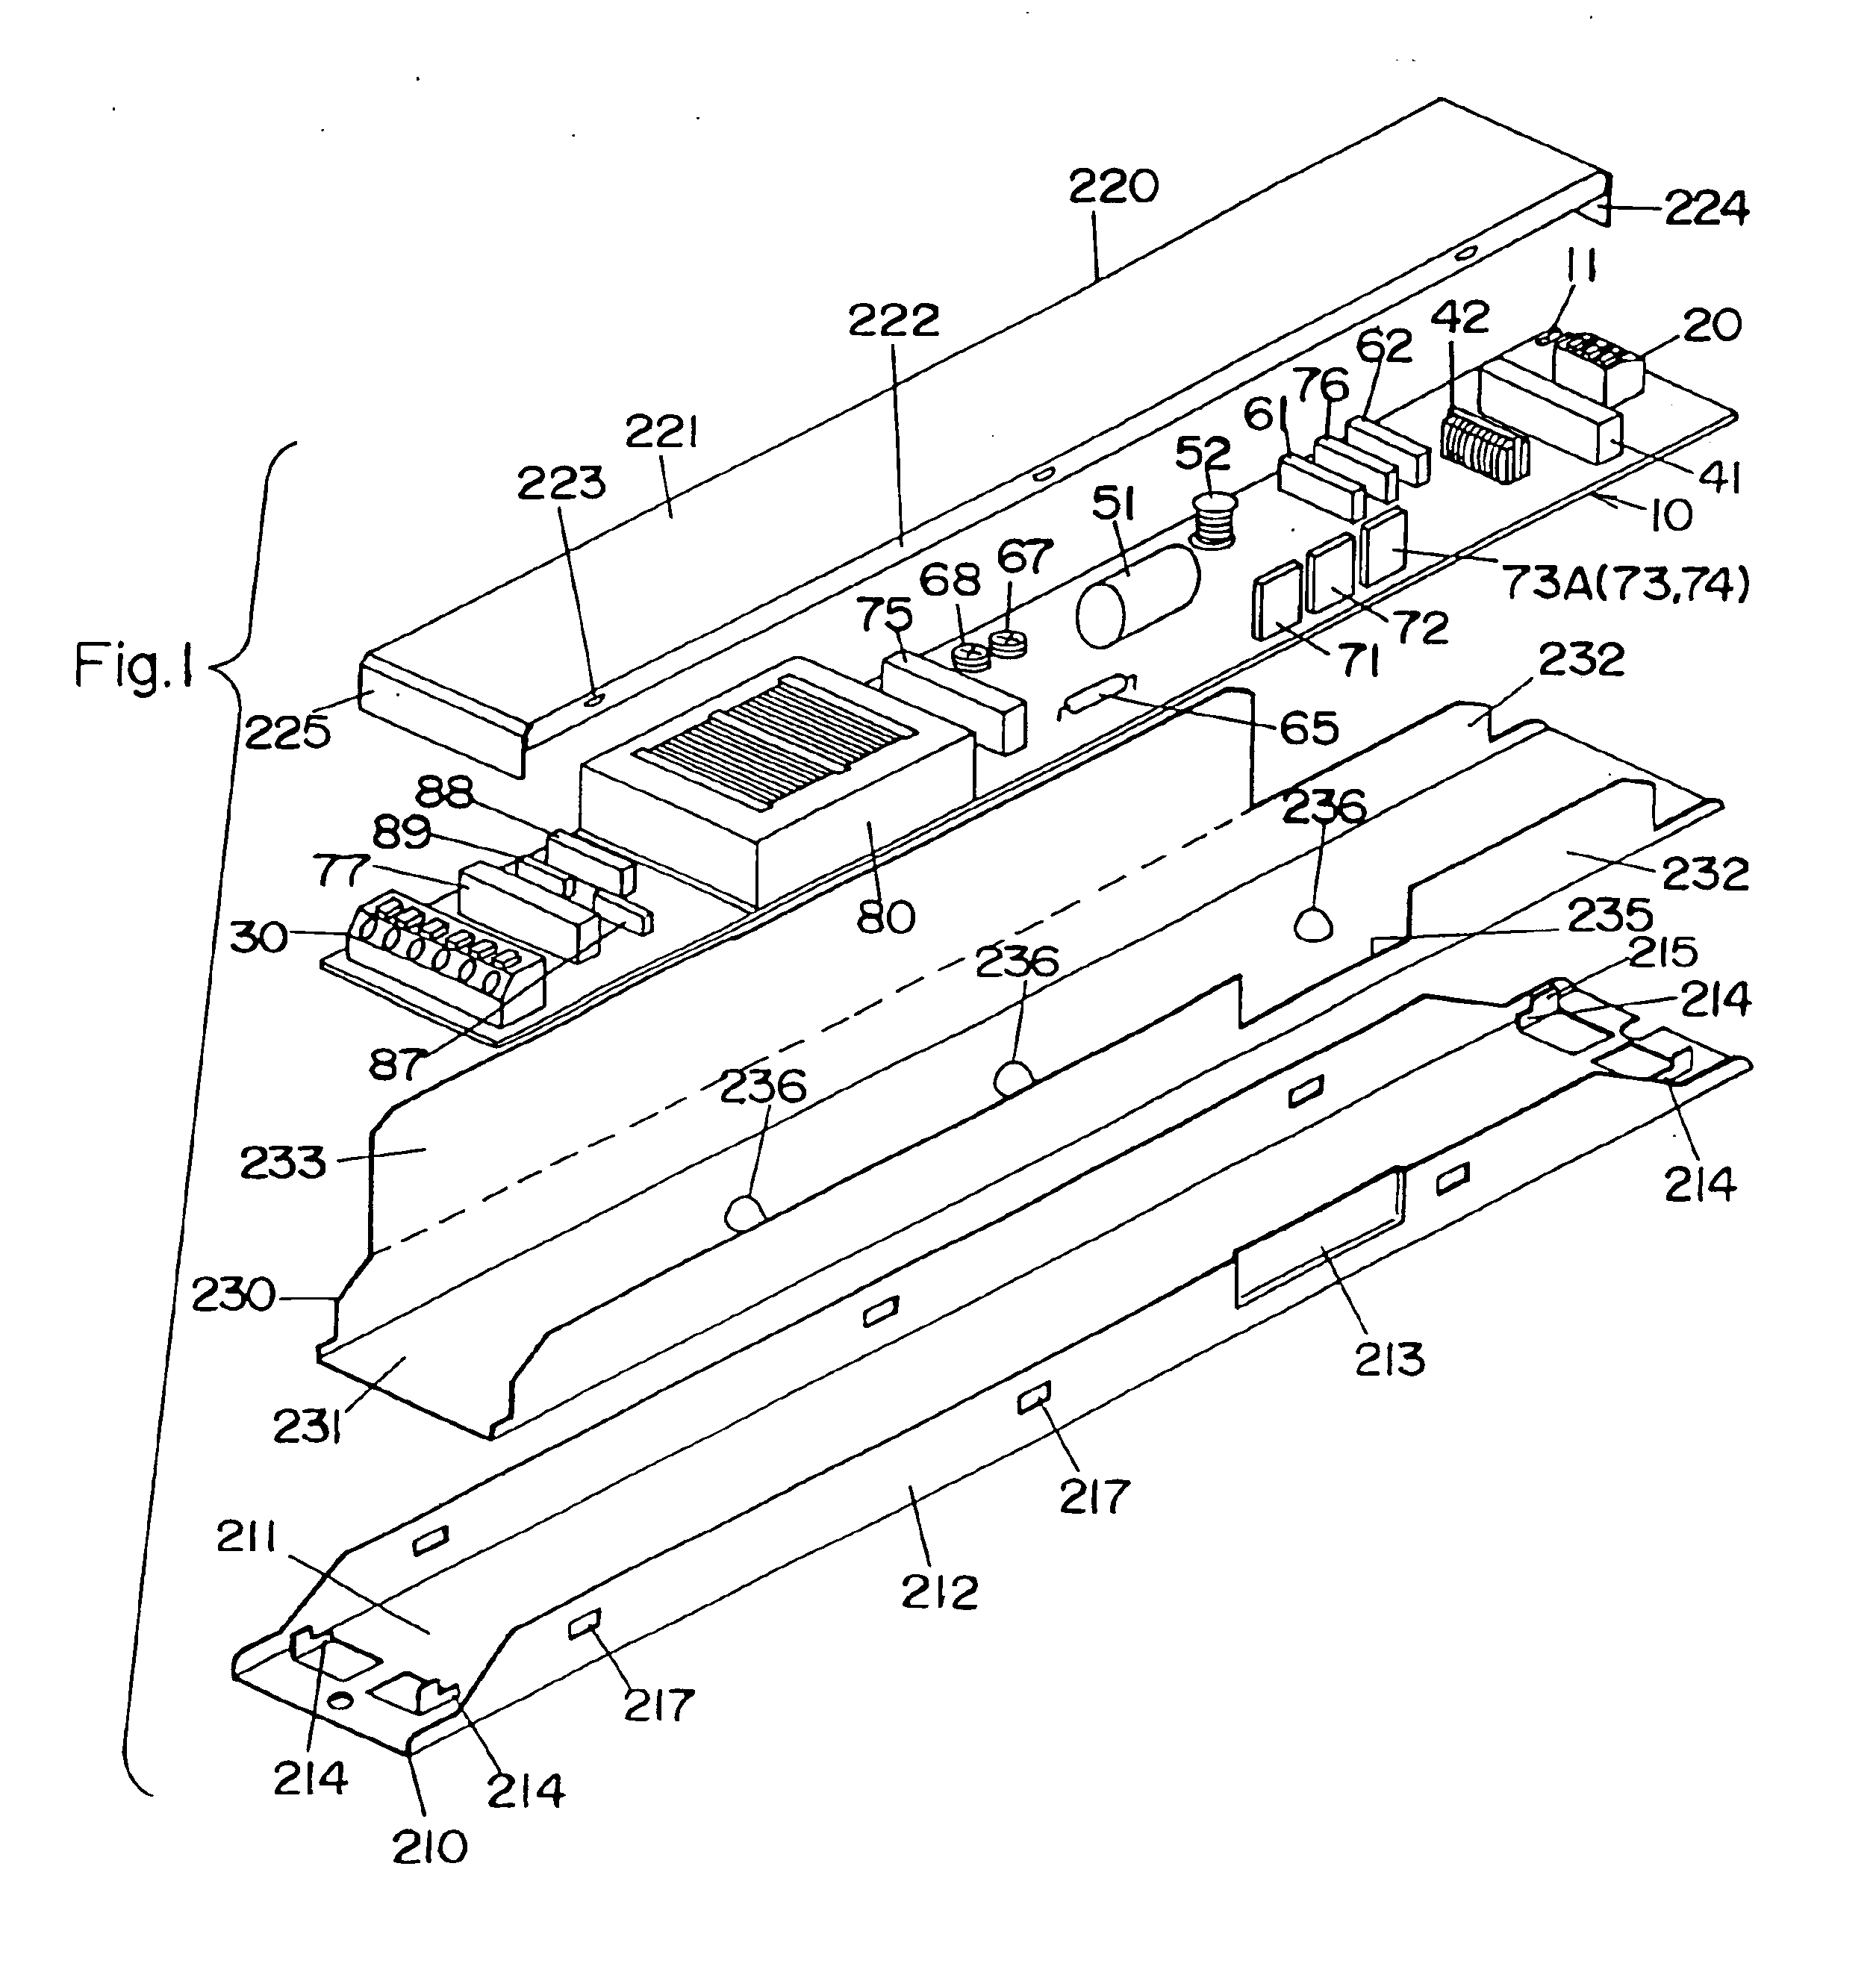 Electronic ballast for a discharge lamp